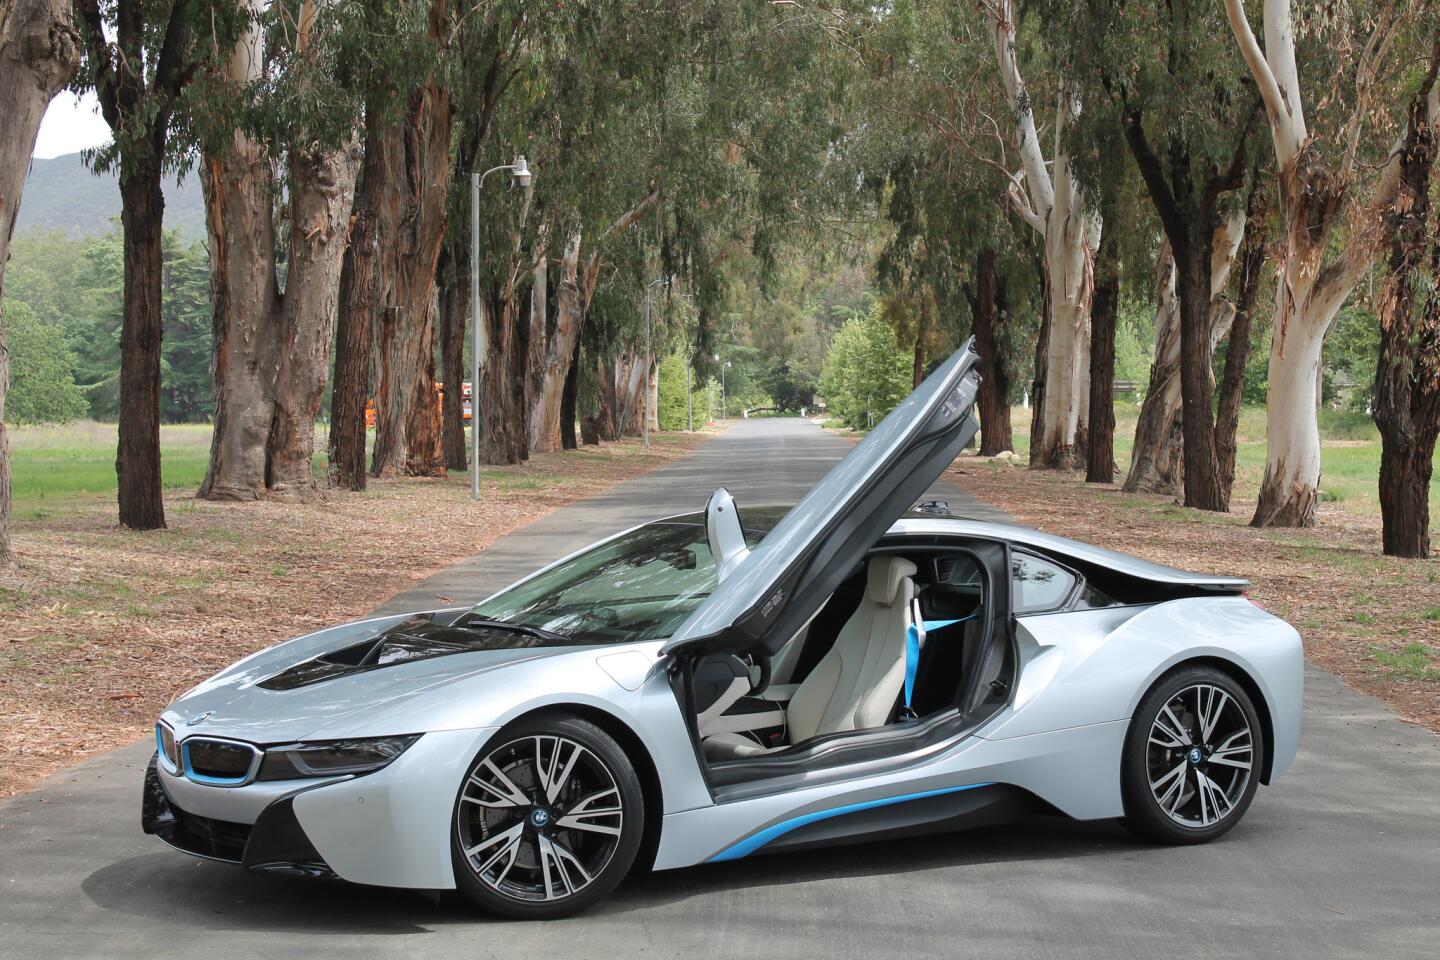 BMW i8: Reviewing The Car Of Tomorrow